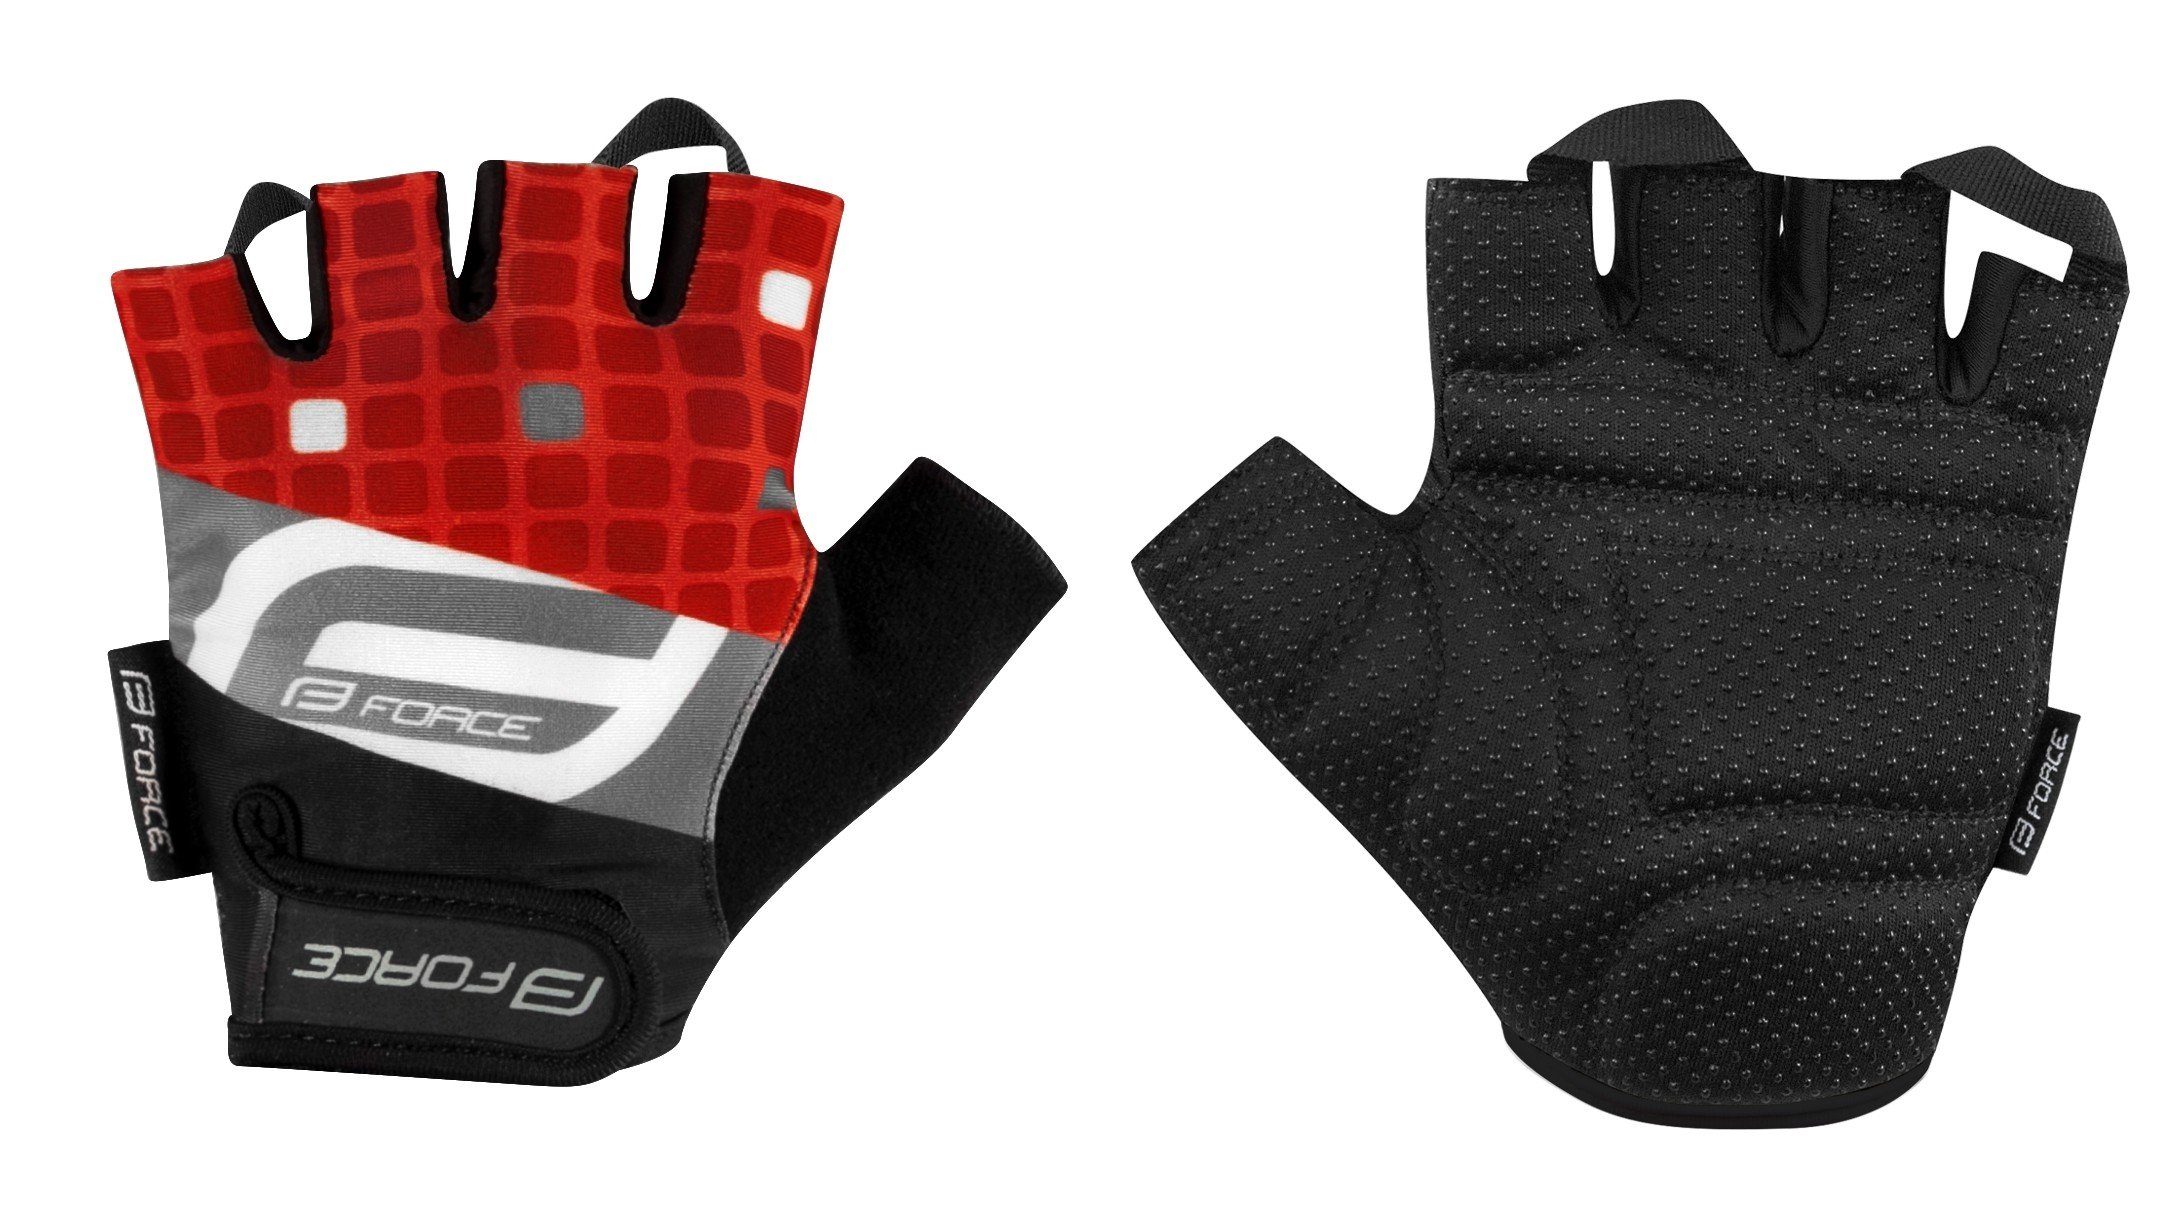 FORCE SQUARE Handschuhe FORCE Fahrradhandschuhe